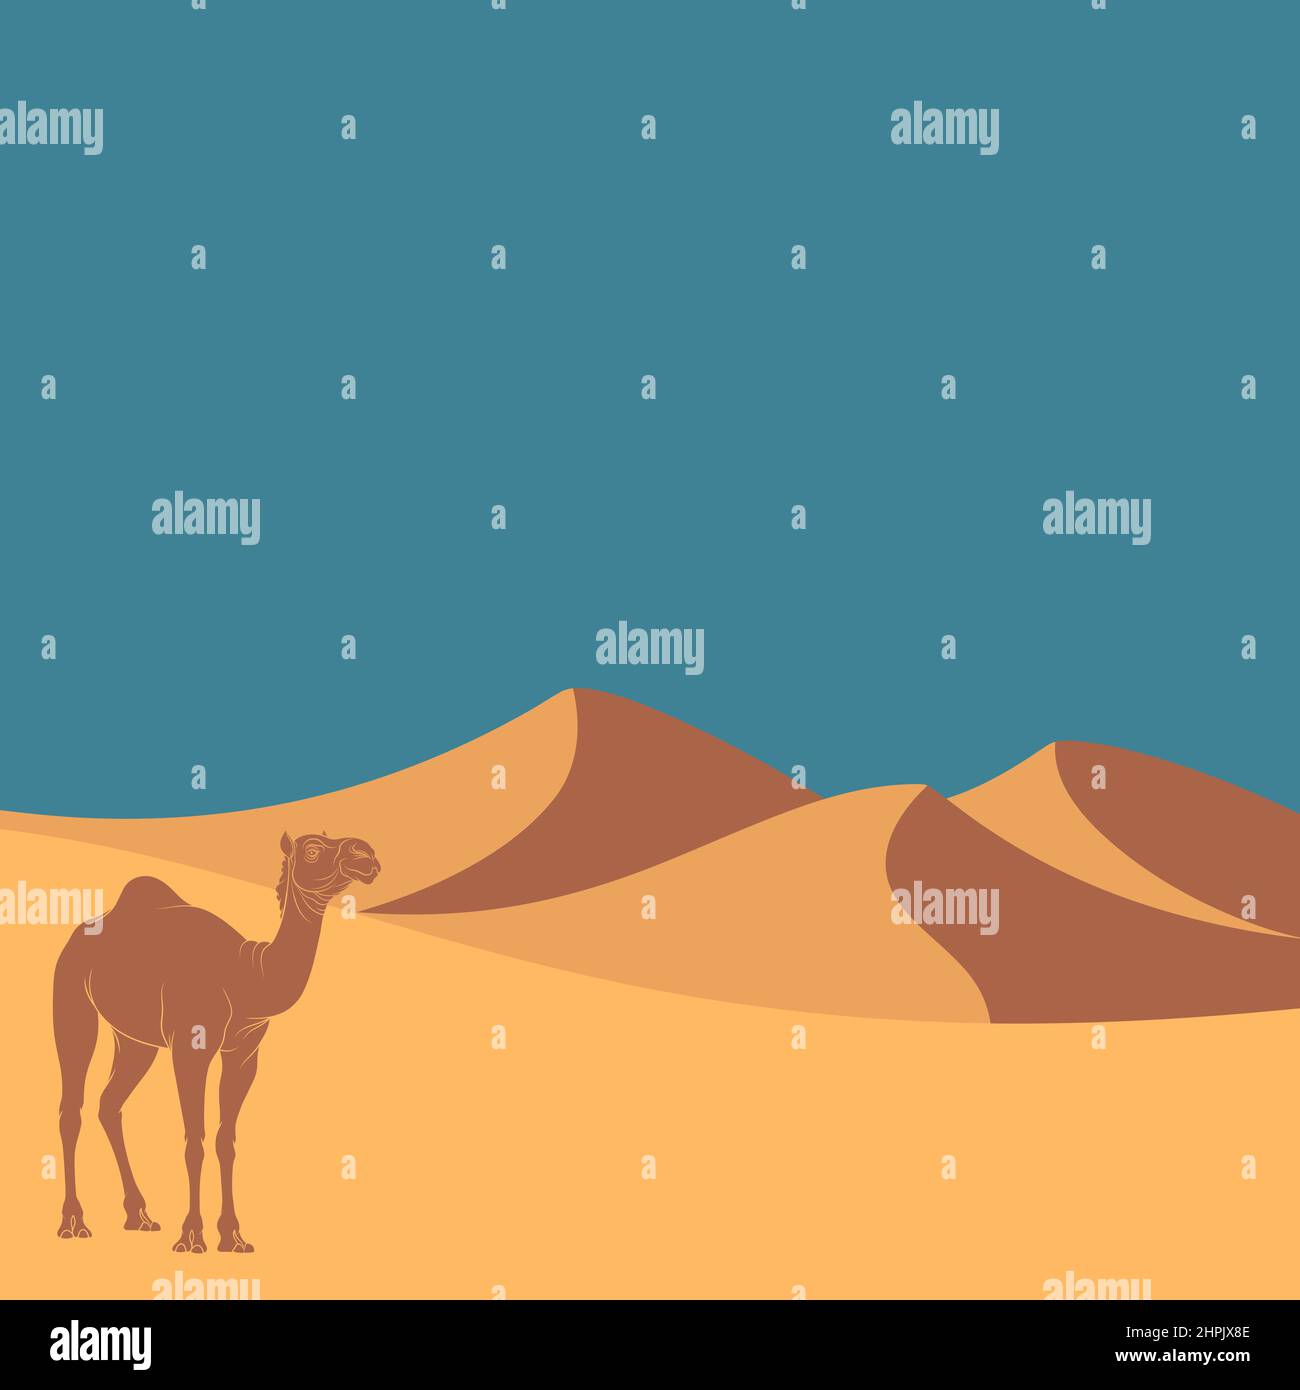 Landscape with desert, dunes and camel. Vector colored background. Stock Vector